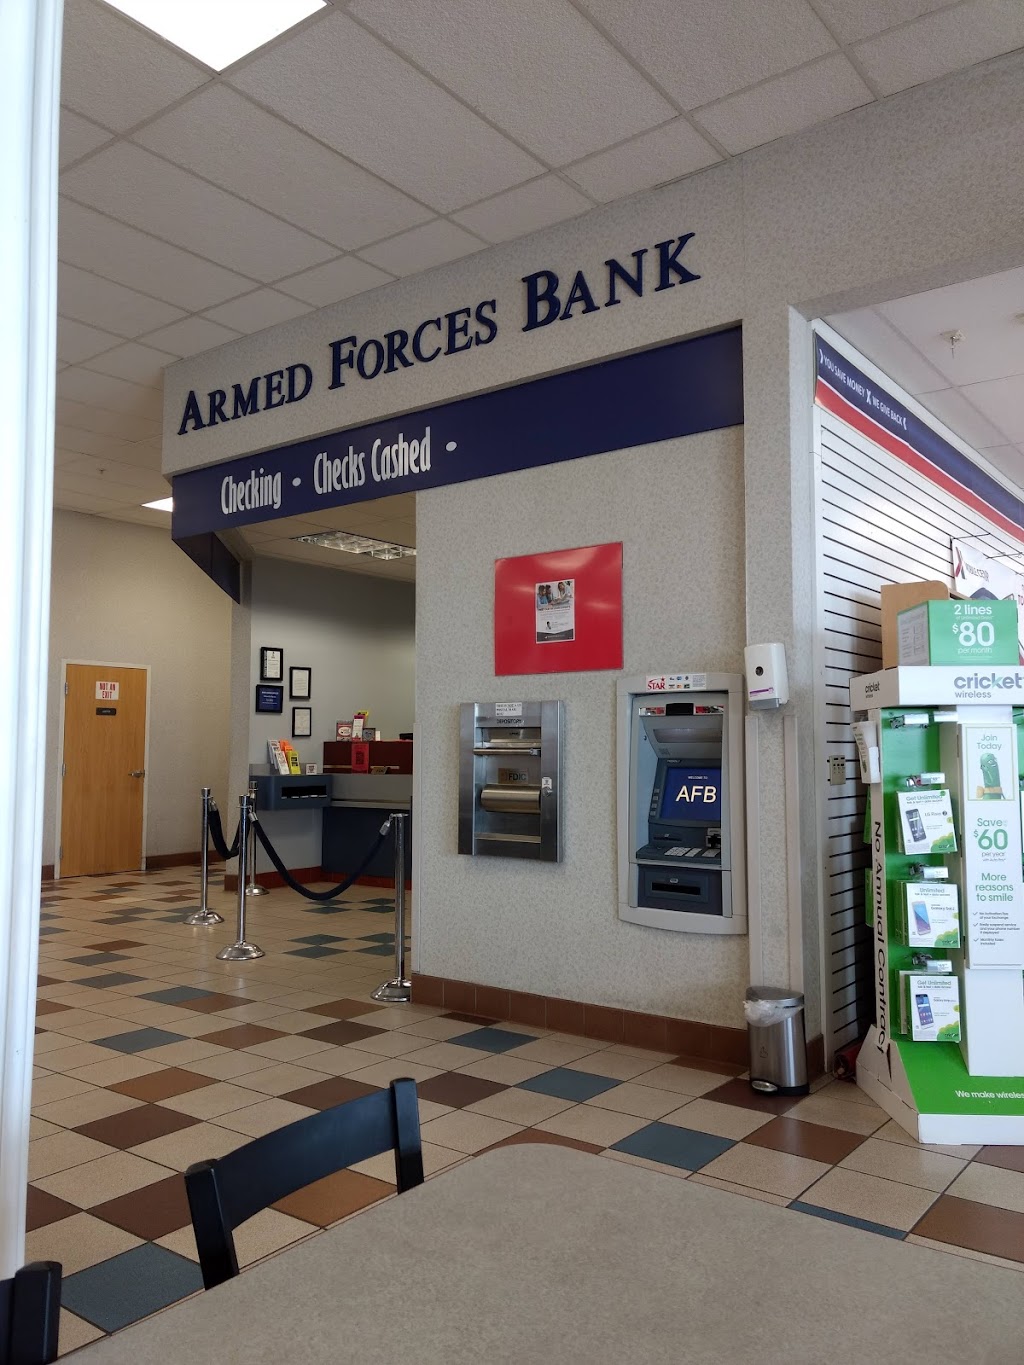 Armed Forces Bank | Biggs Mini Mall, 13471 Sergeant Major Blvd, Fort Bliss, TX 79916 | Phone: (915) 564-5932